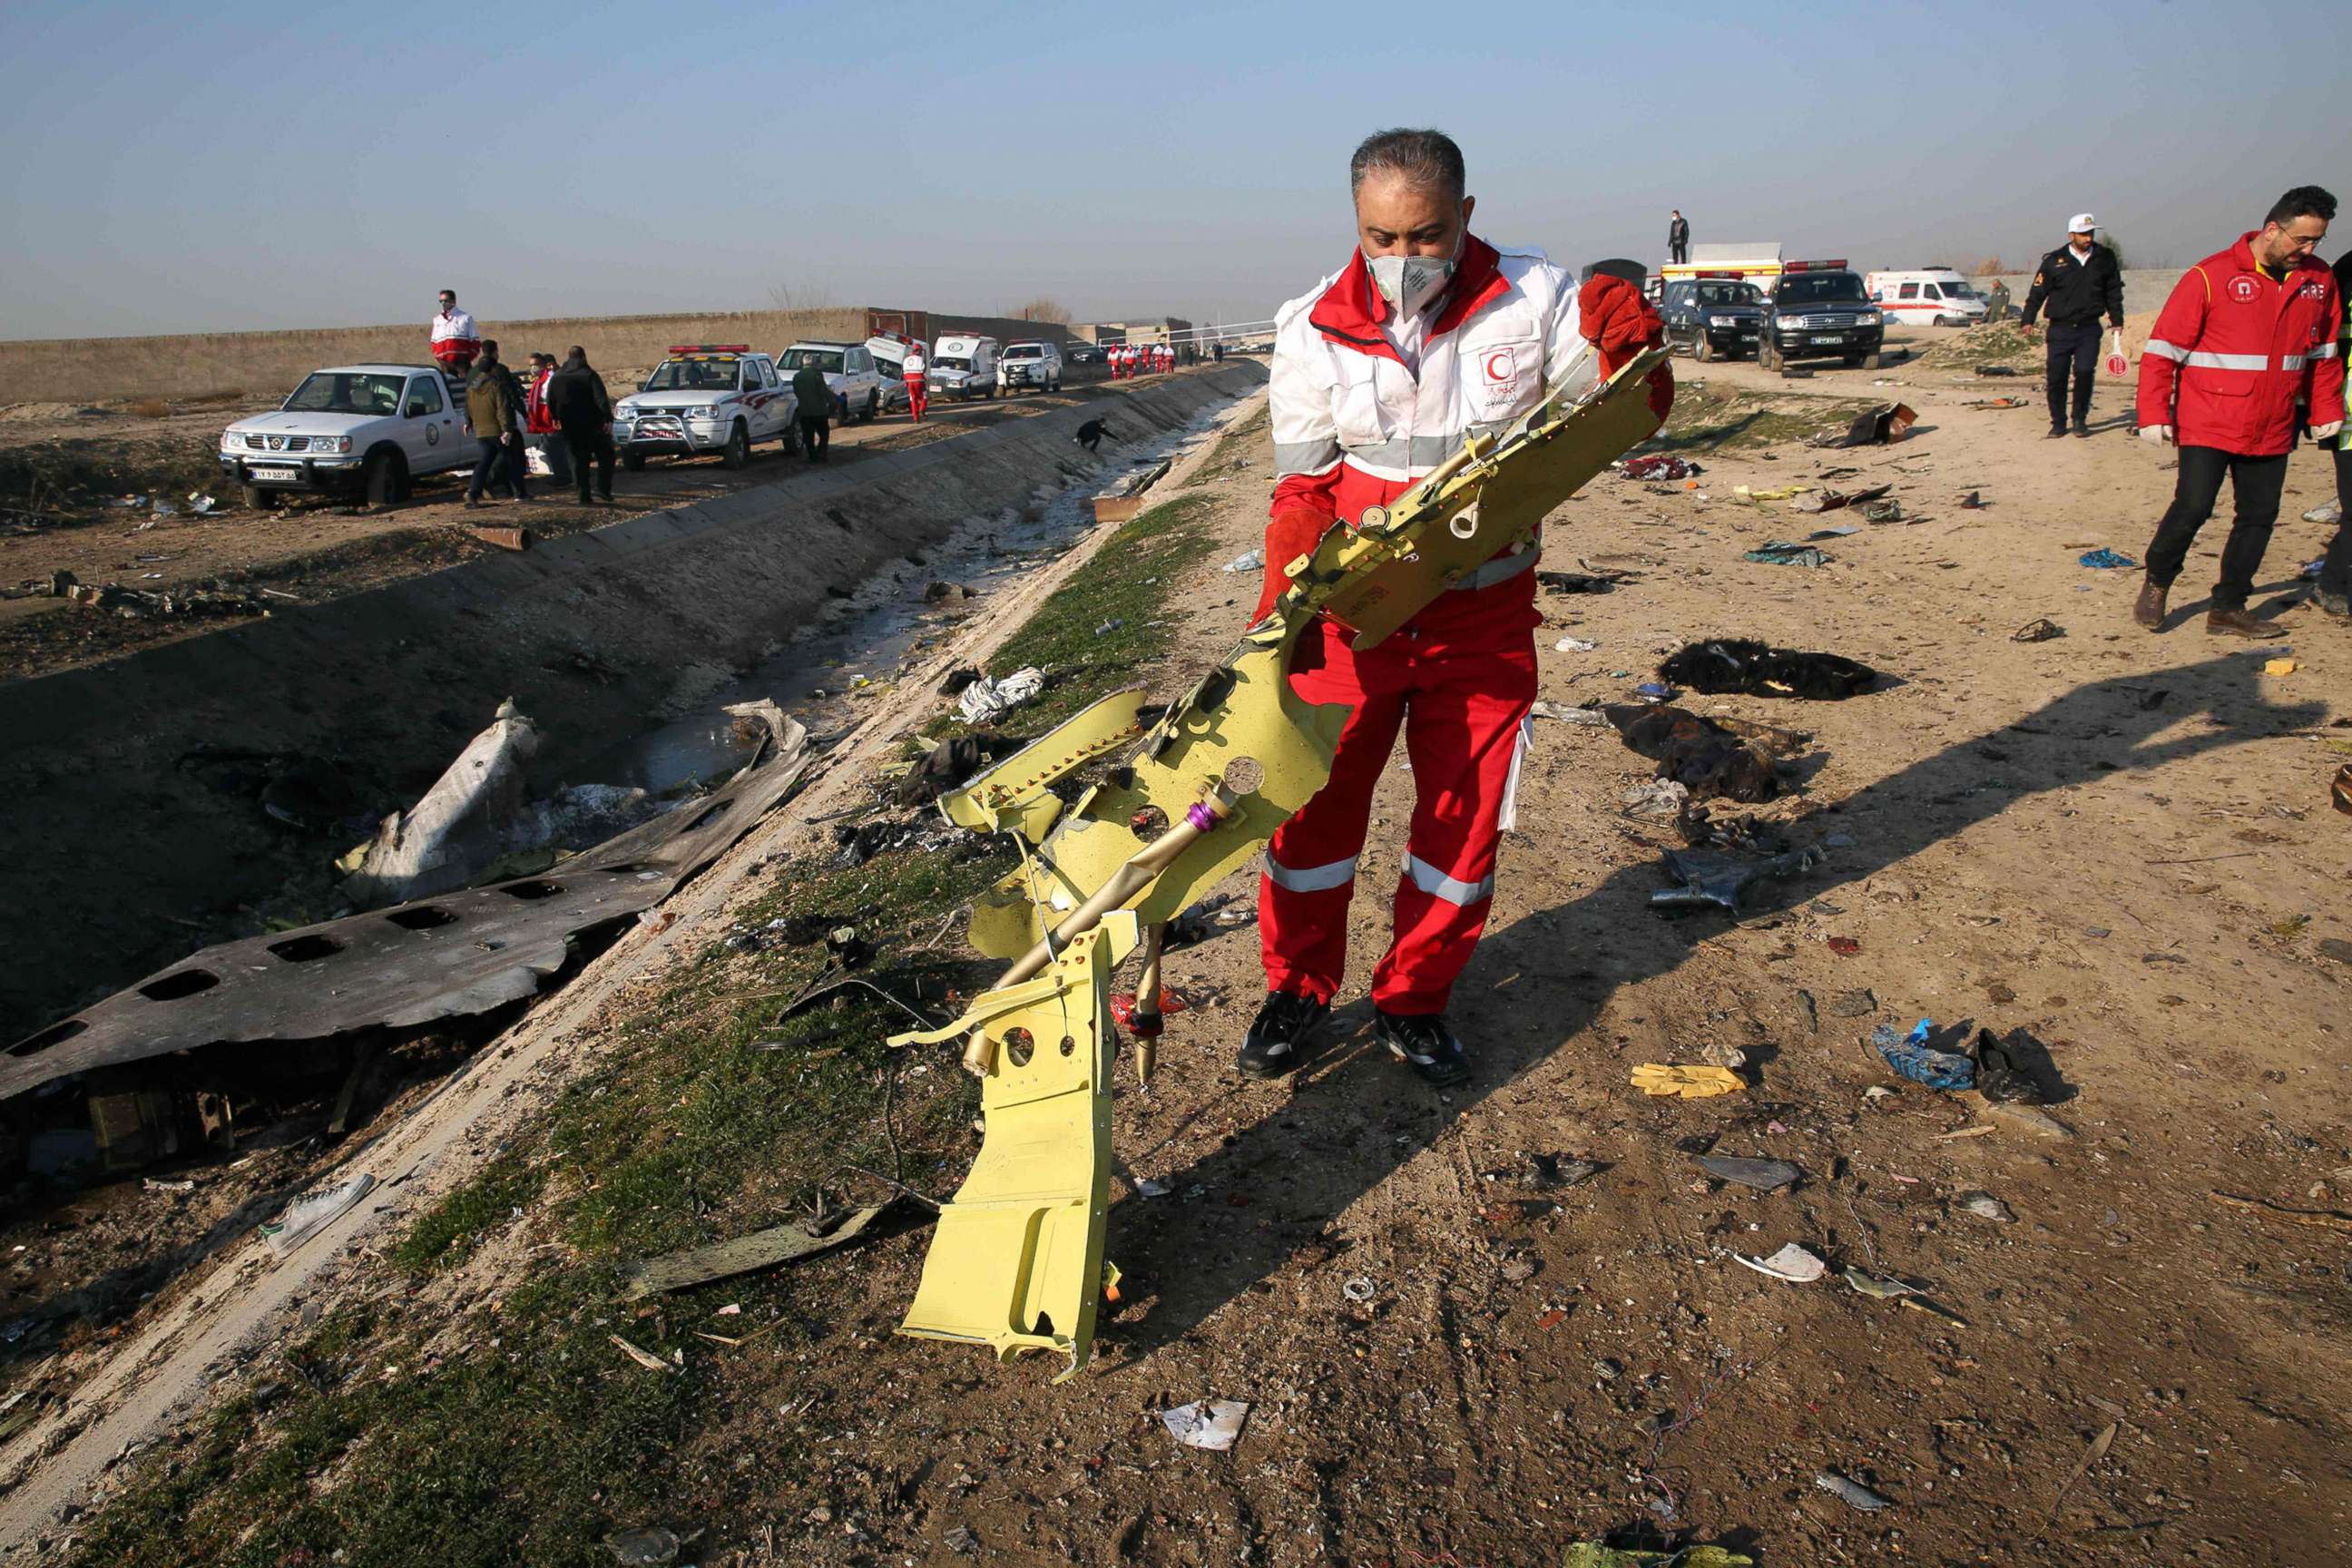 PHOTO: Rescue teams recover debris from a field after a Ukrainian plane carrying 176 passengers crashed near Imam Khomeini airport in the Iranian capital Tehran early in the morning on Jan. 8, 2020, killing everyone on board.